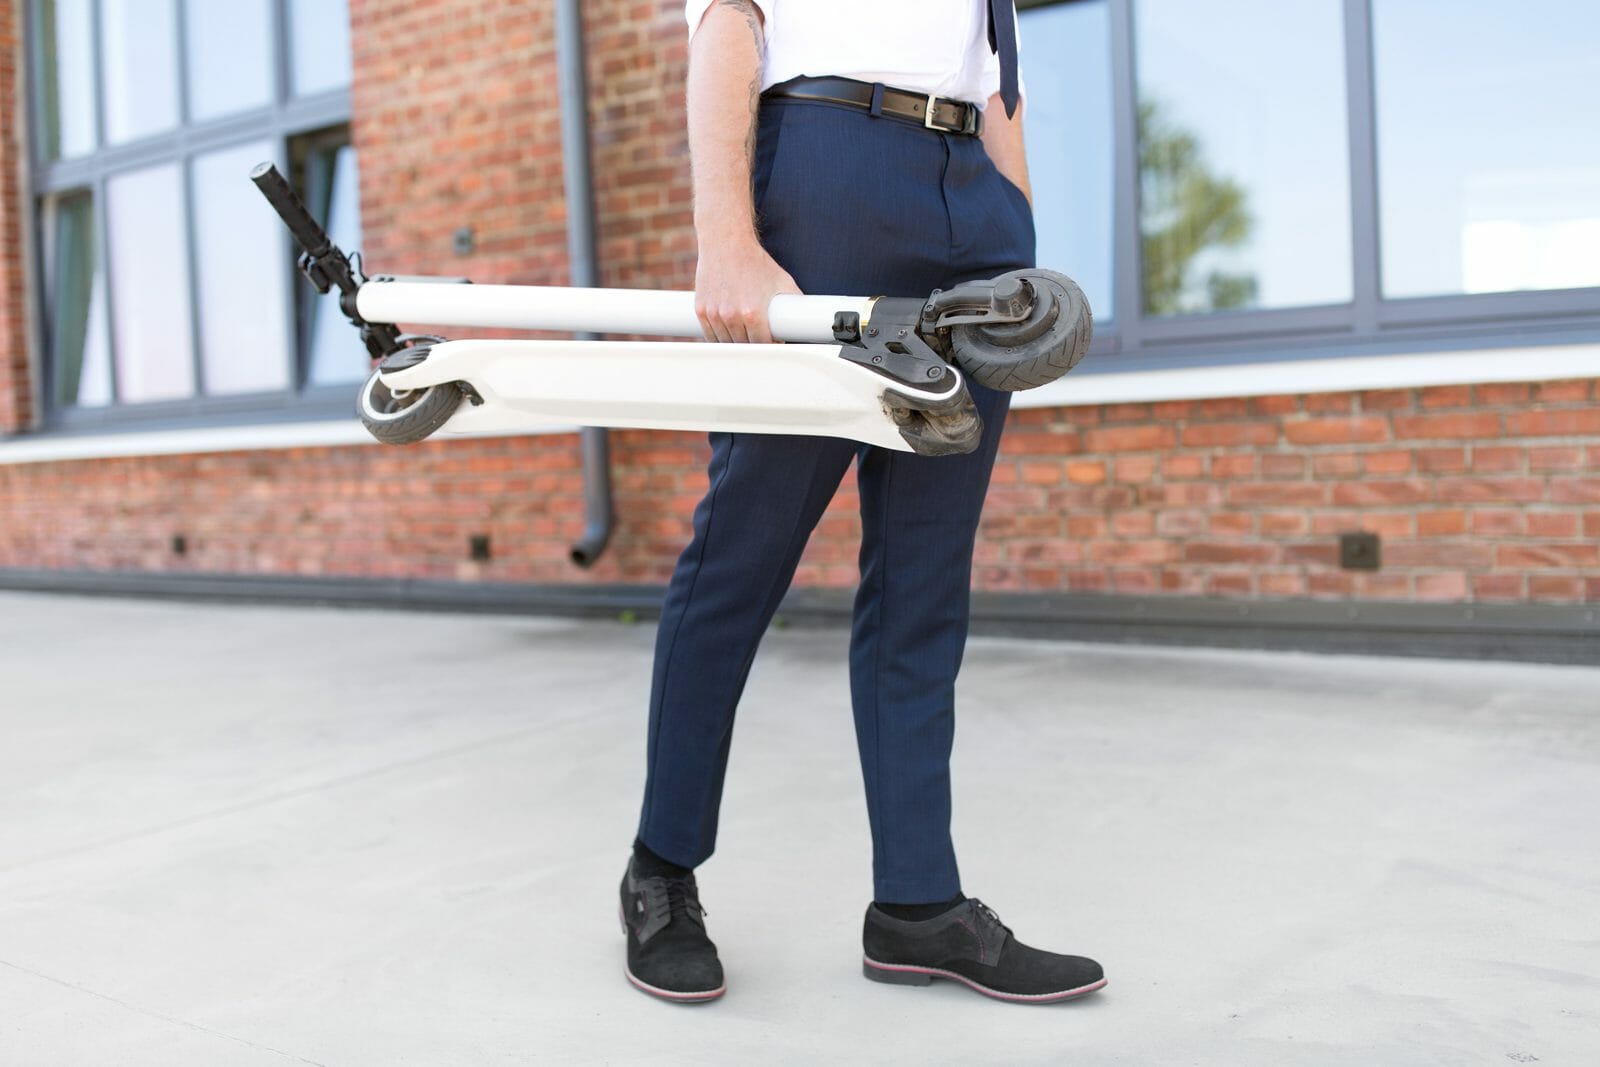 Advantages and Disadvantages to Buying an Electric Scooter